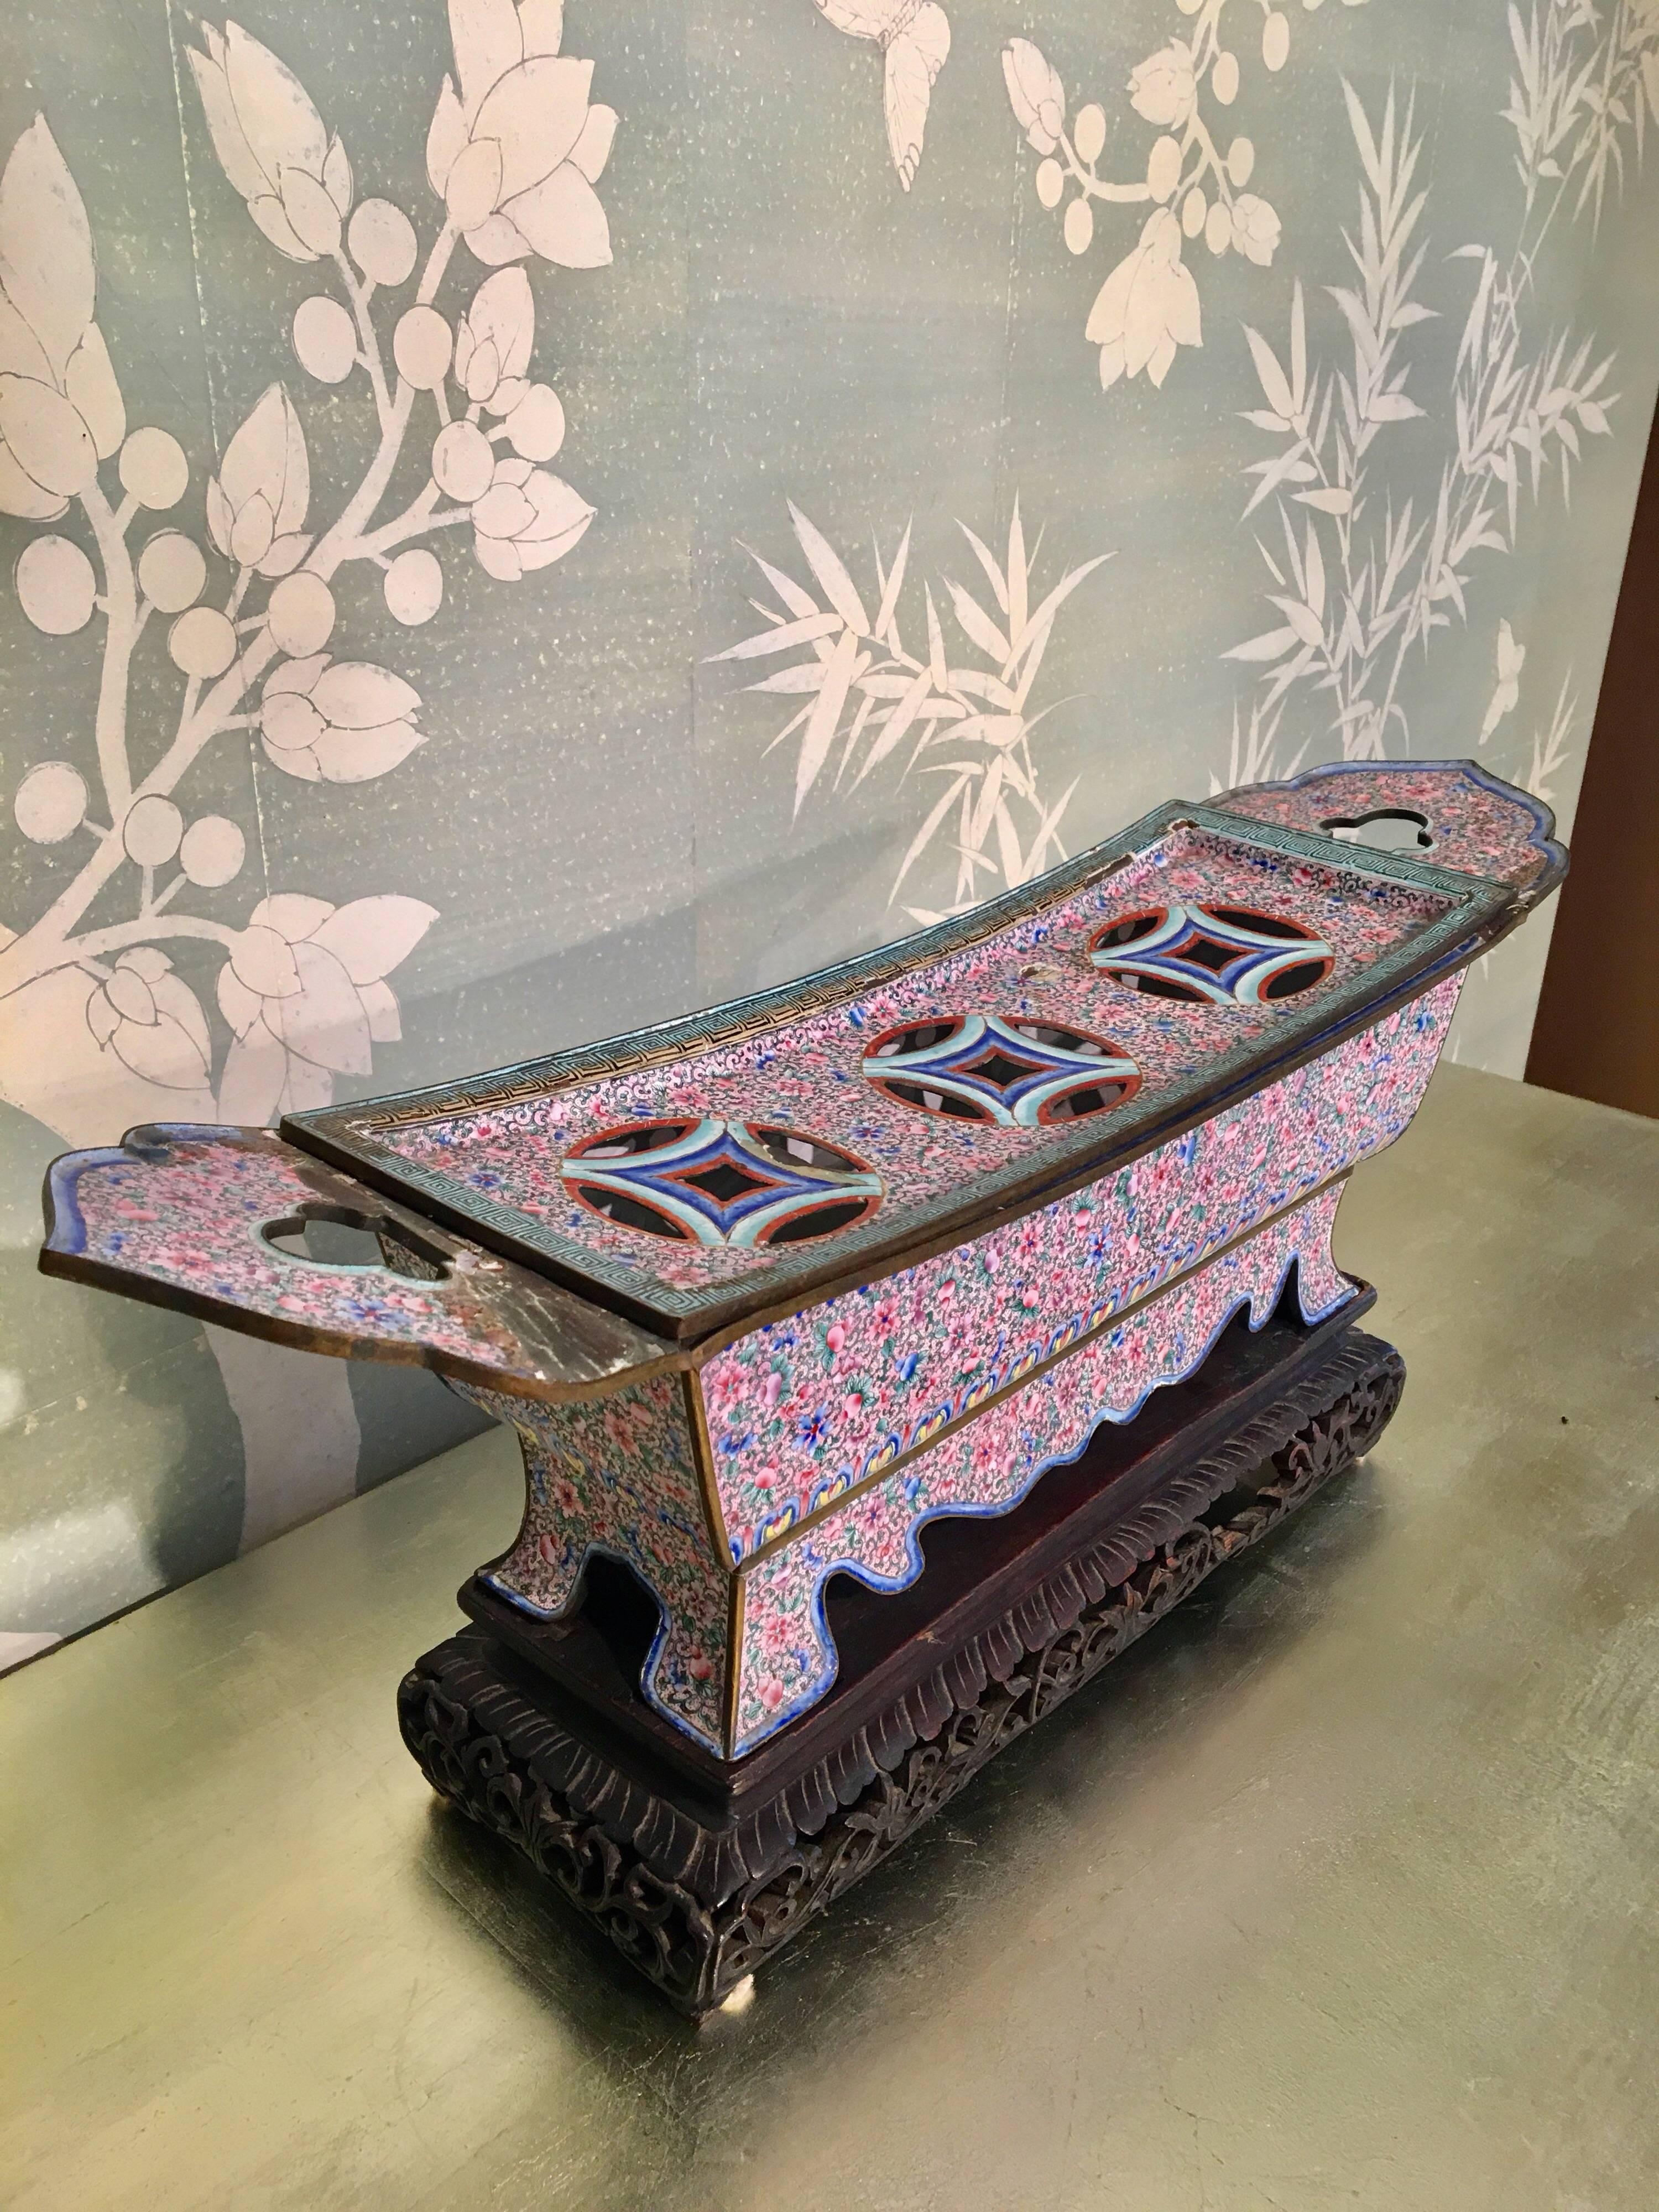 A 19th century Chinese pink enamel brazier. Intricately detailed with beautiful colors on a wooden stand. Measures: 9